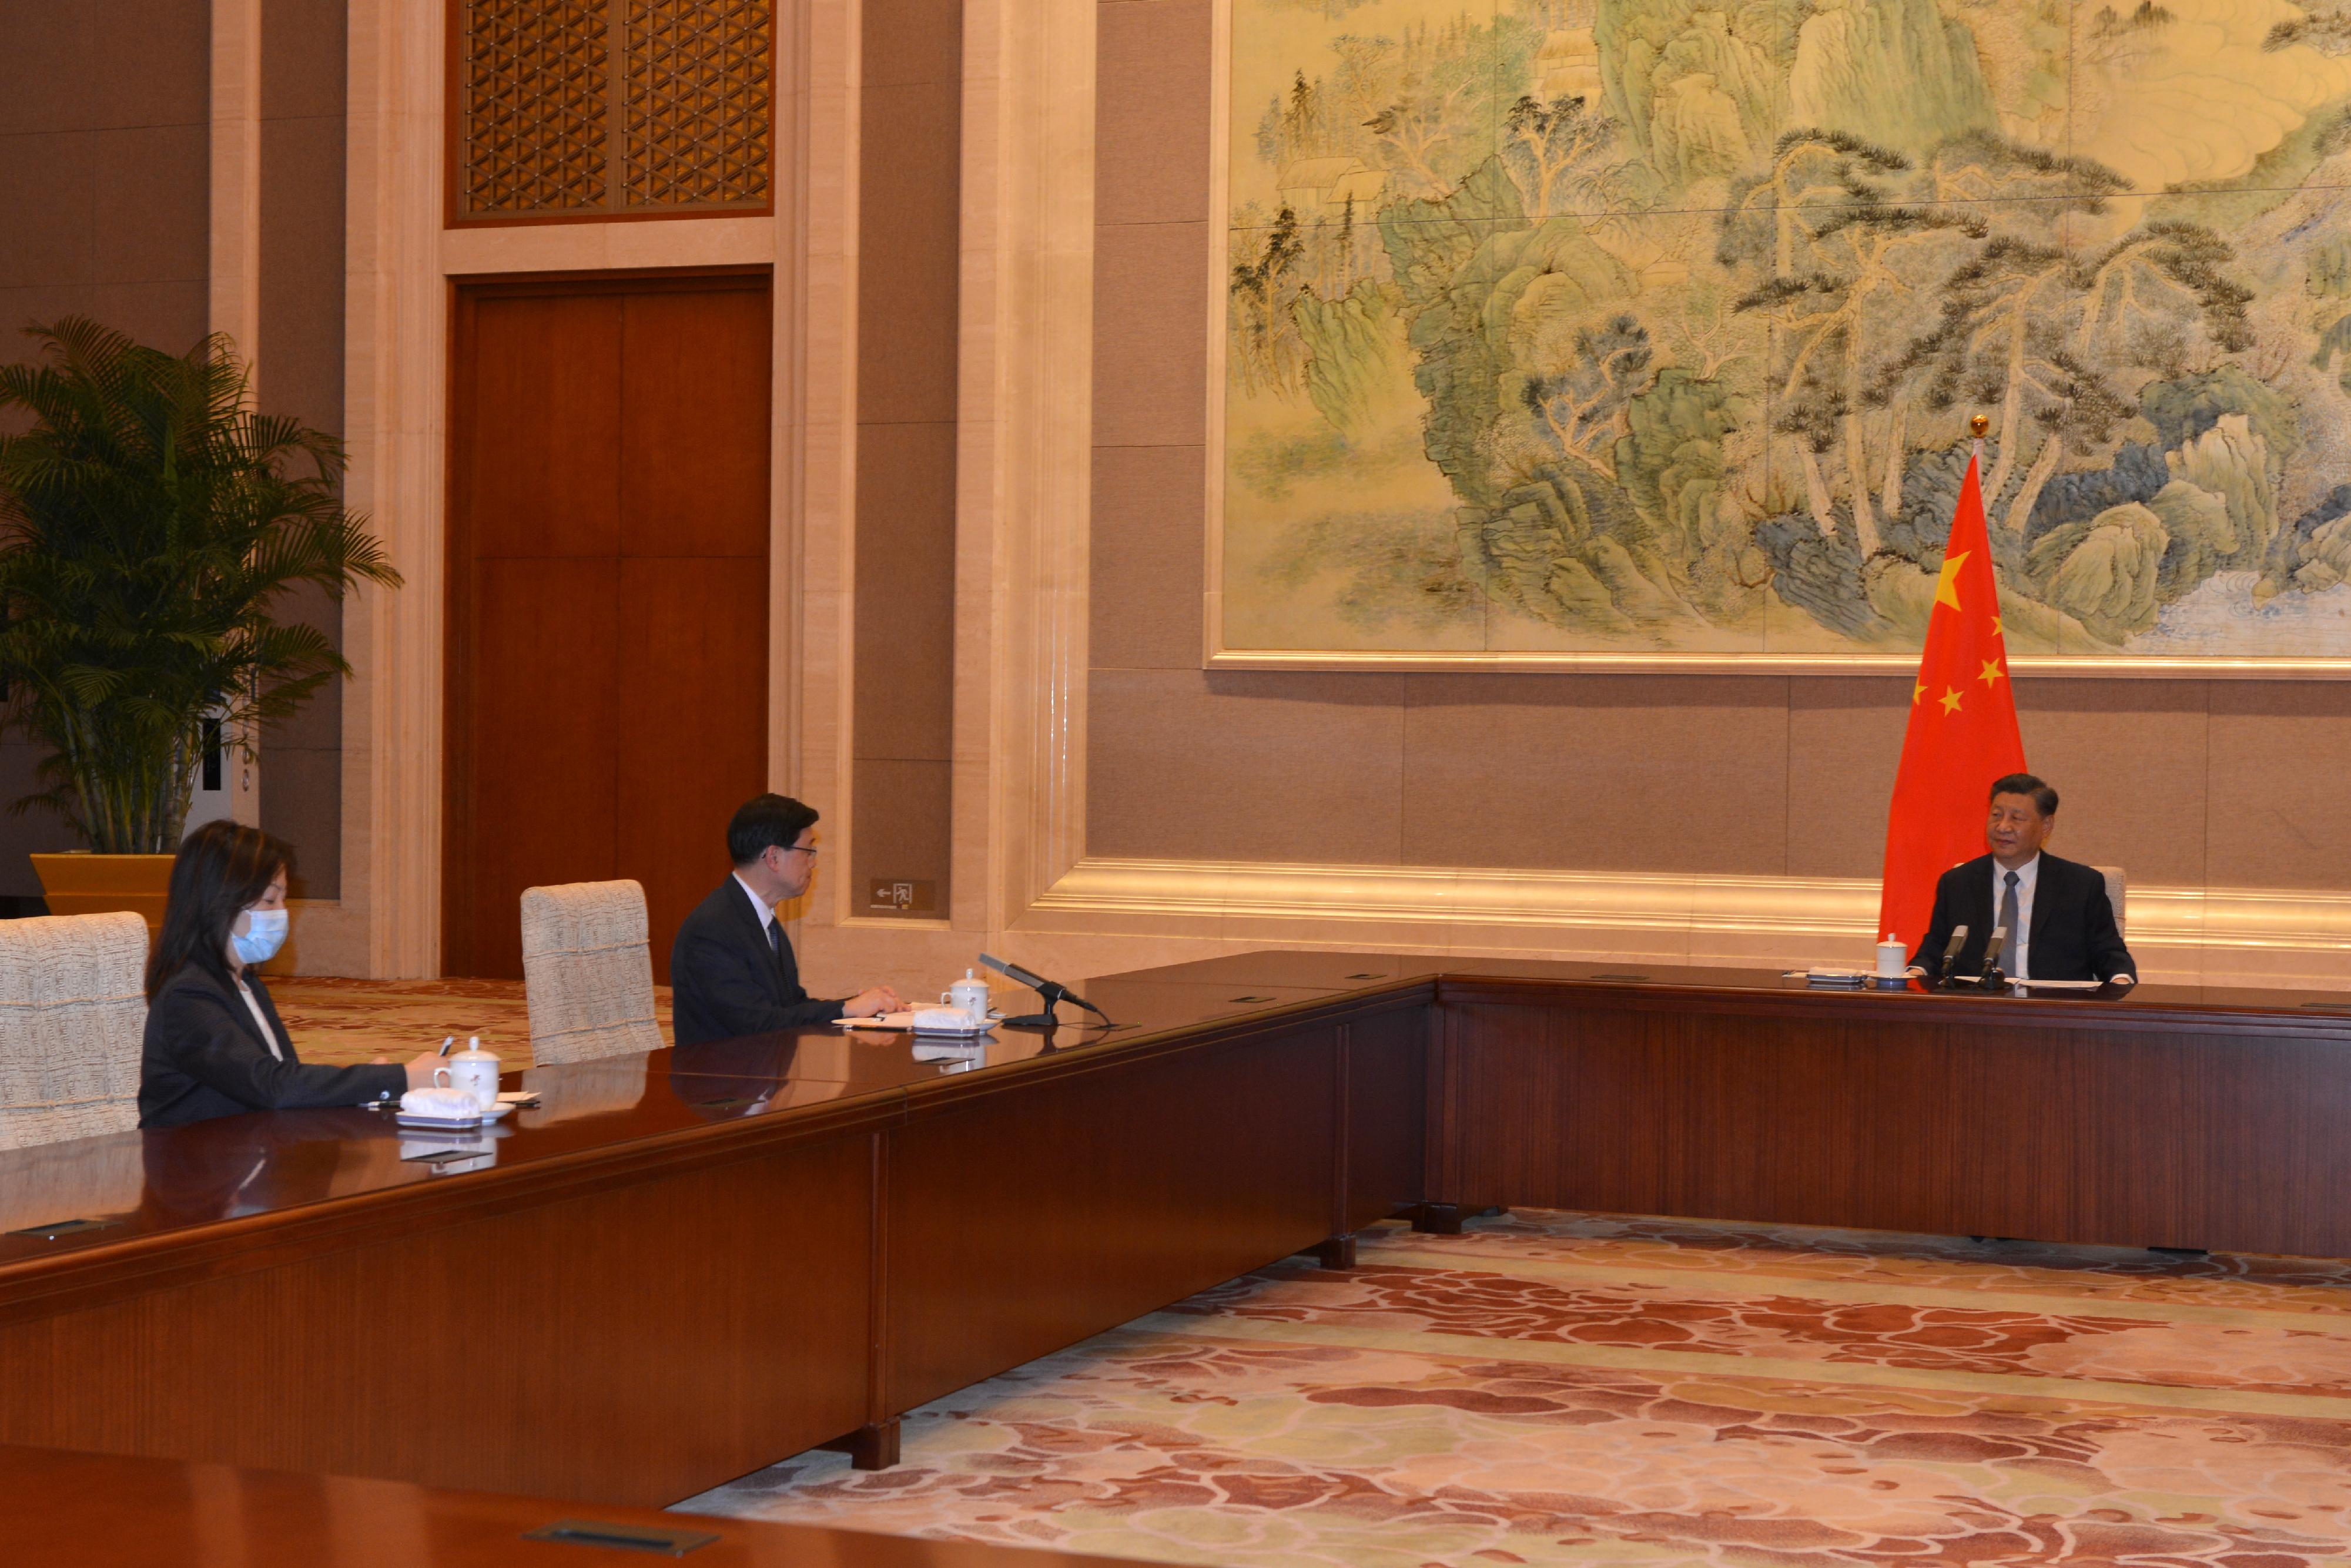 The Chief Executive-elect, Mr John Lee (centre), is received by President Xi Jinping (right) in Beijing today (May 30).